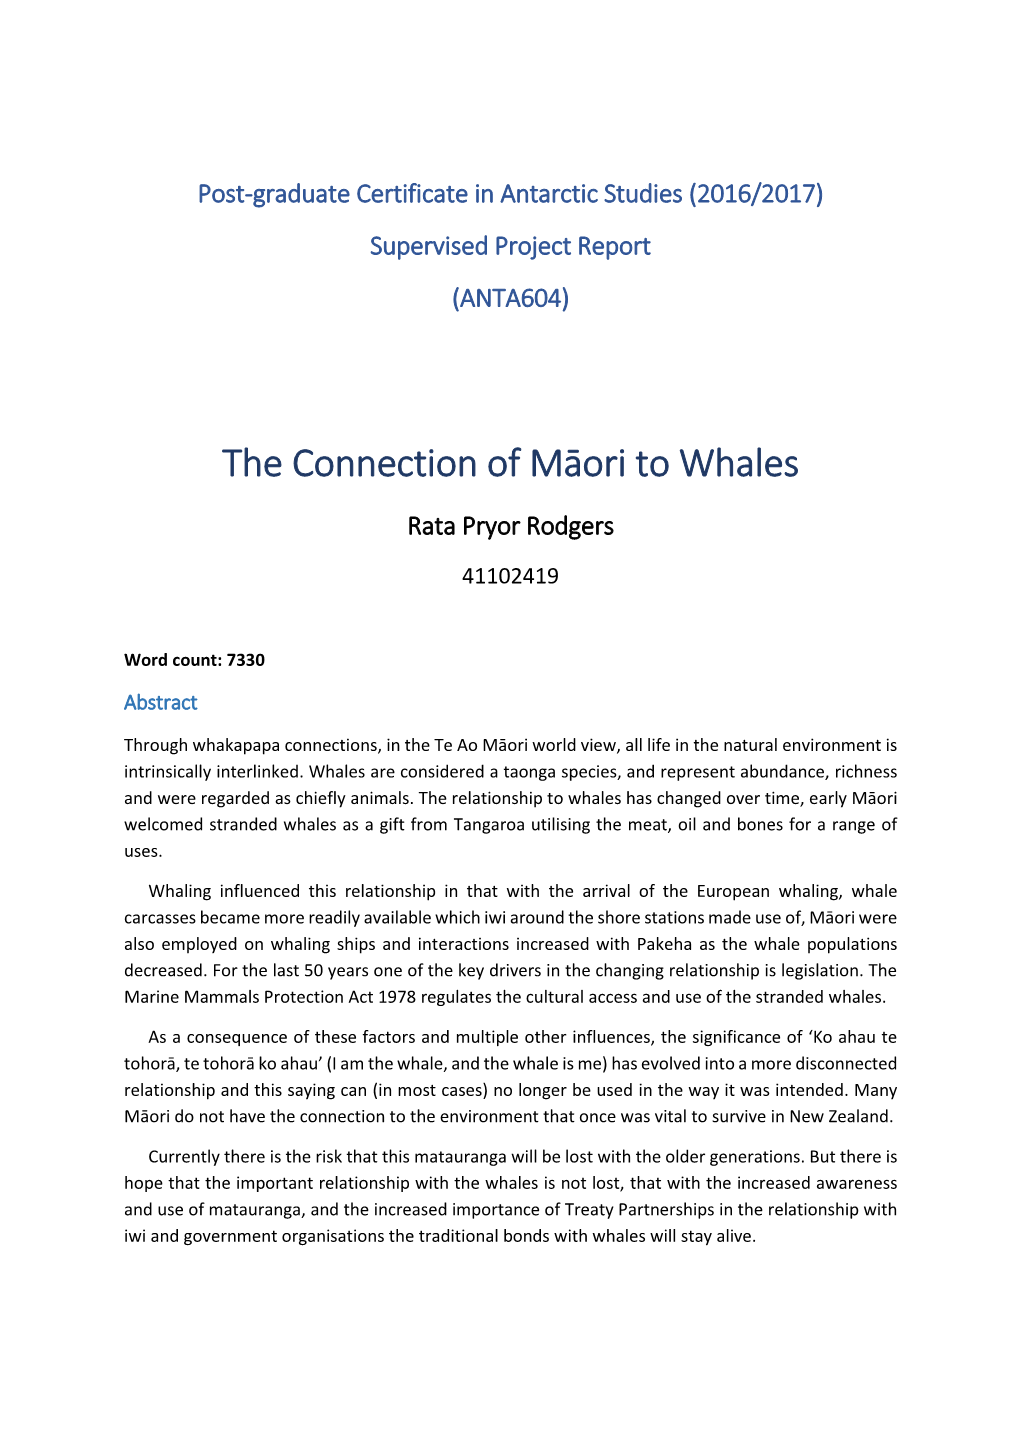 The Connection of Māori to Whales